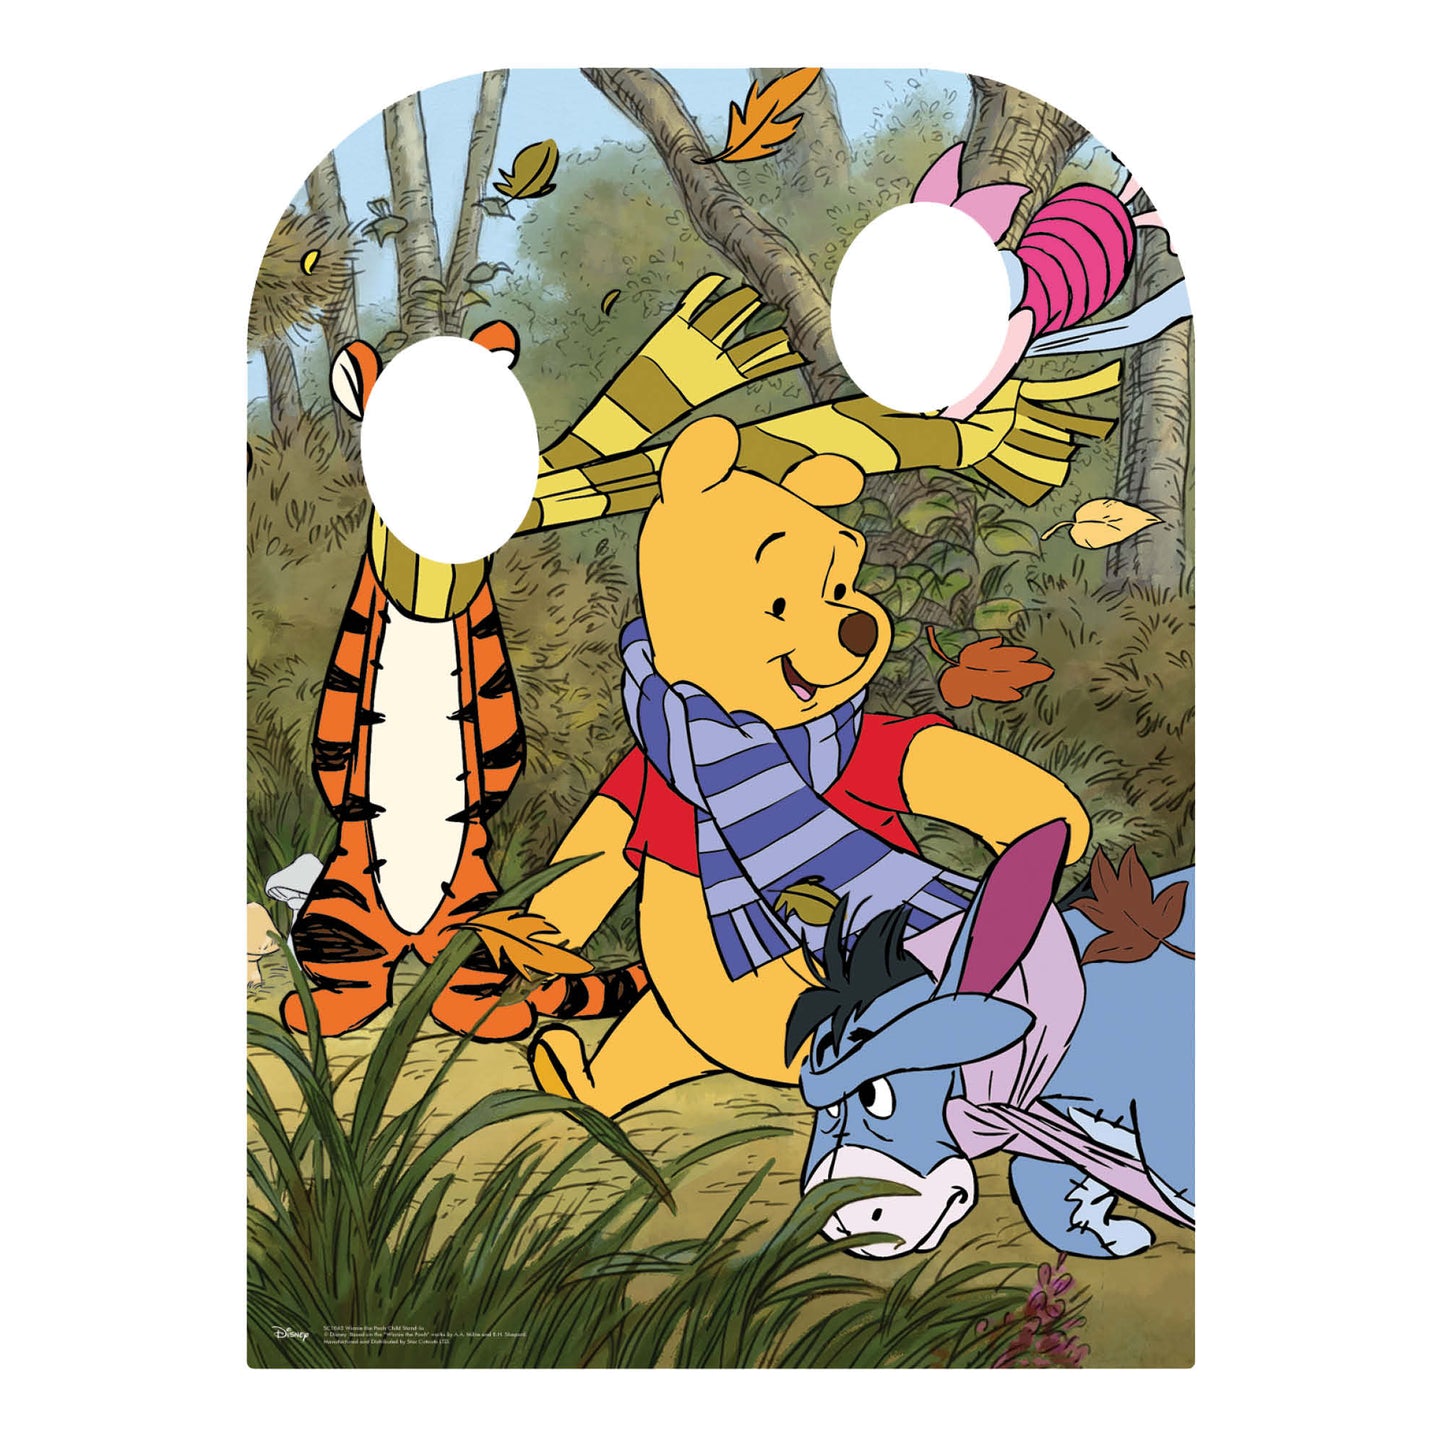 SC1063 Winnie the Pooh Hundred Acre Wood With Friends Stand-in Cardboard Cut Out Height 131cm